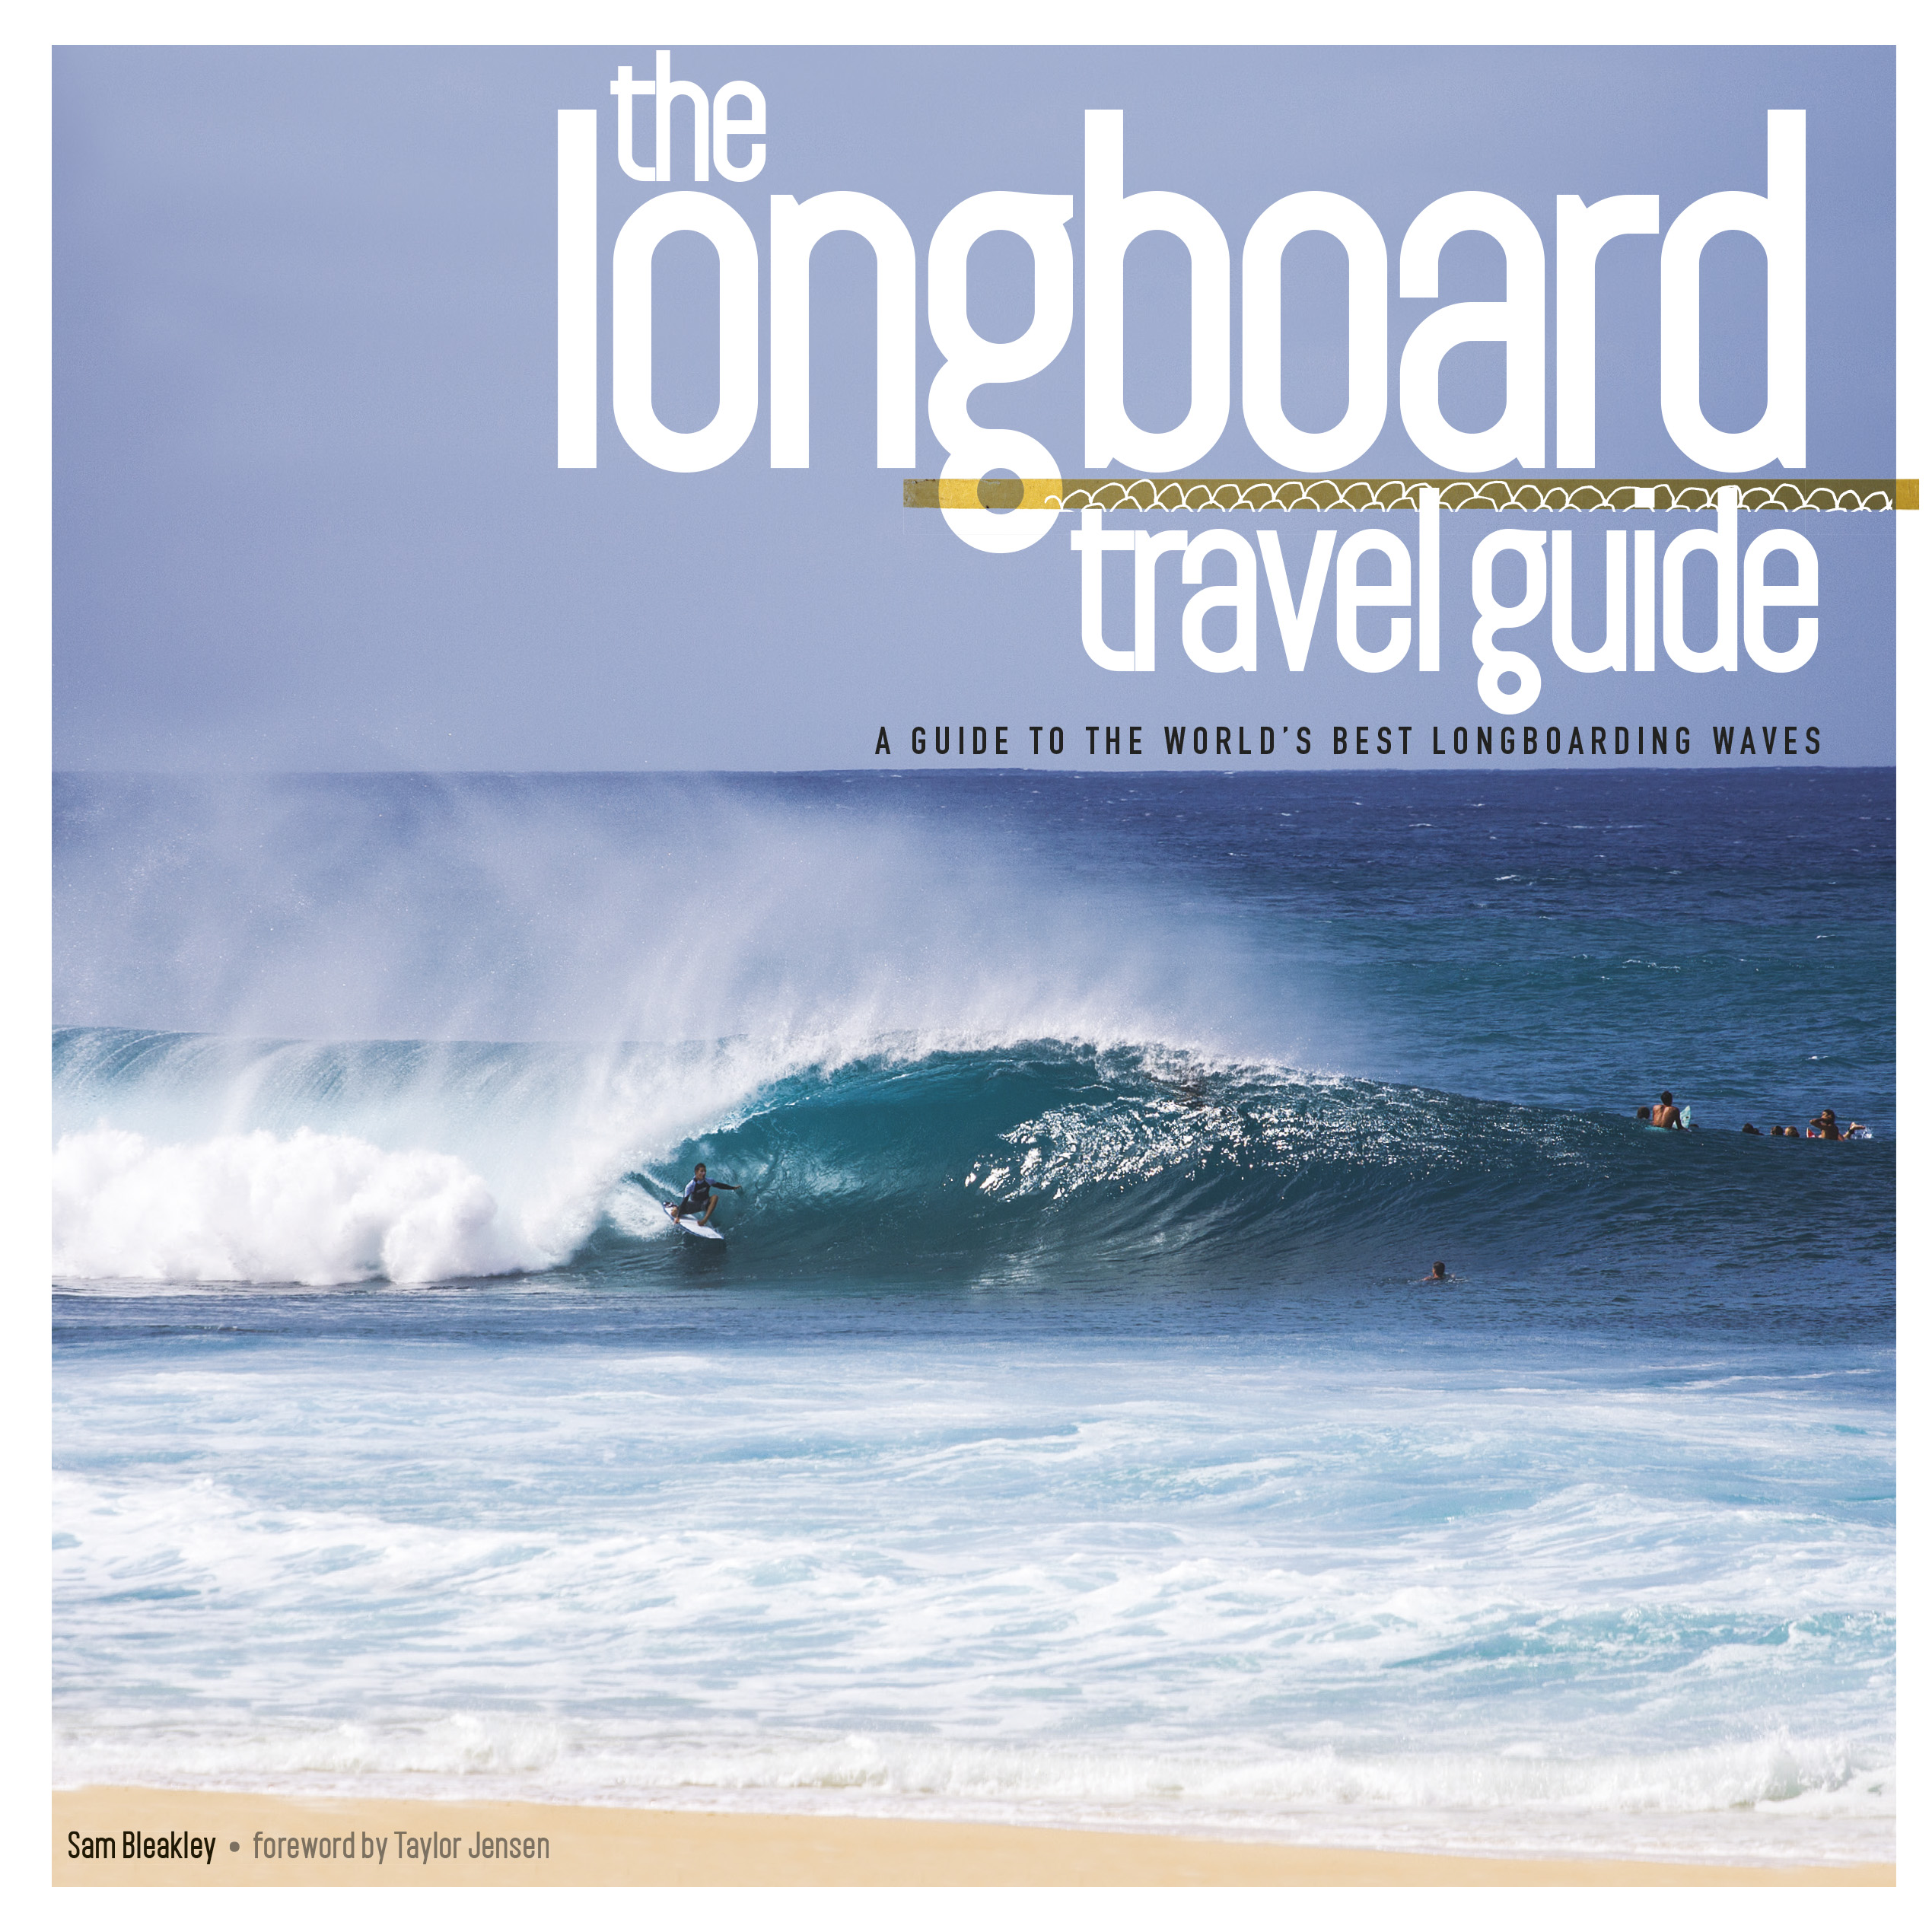 longboard guide to surf travel 13.indd